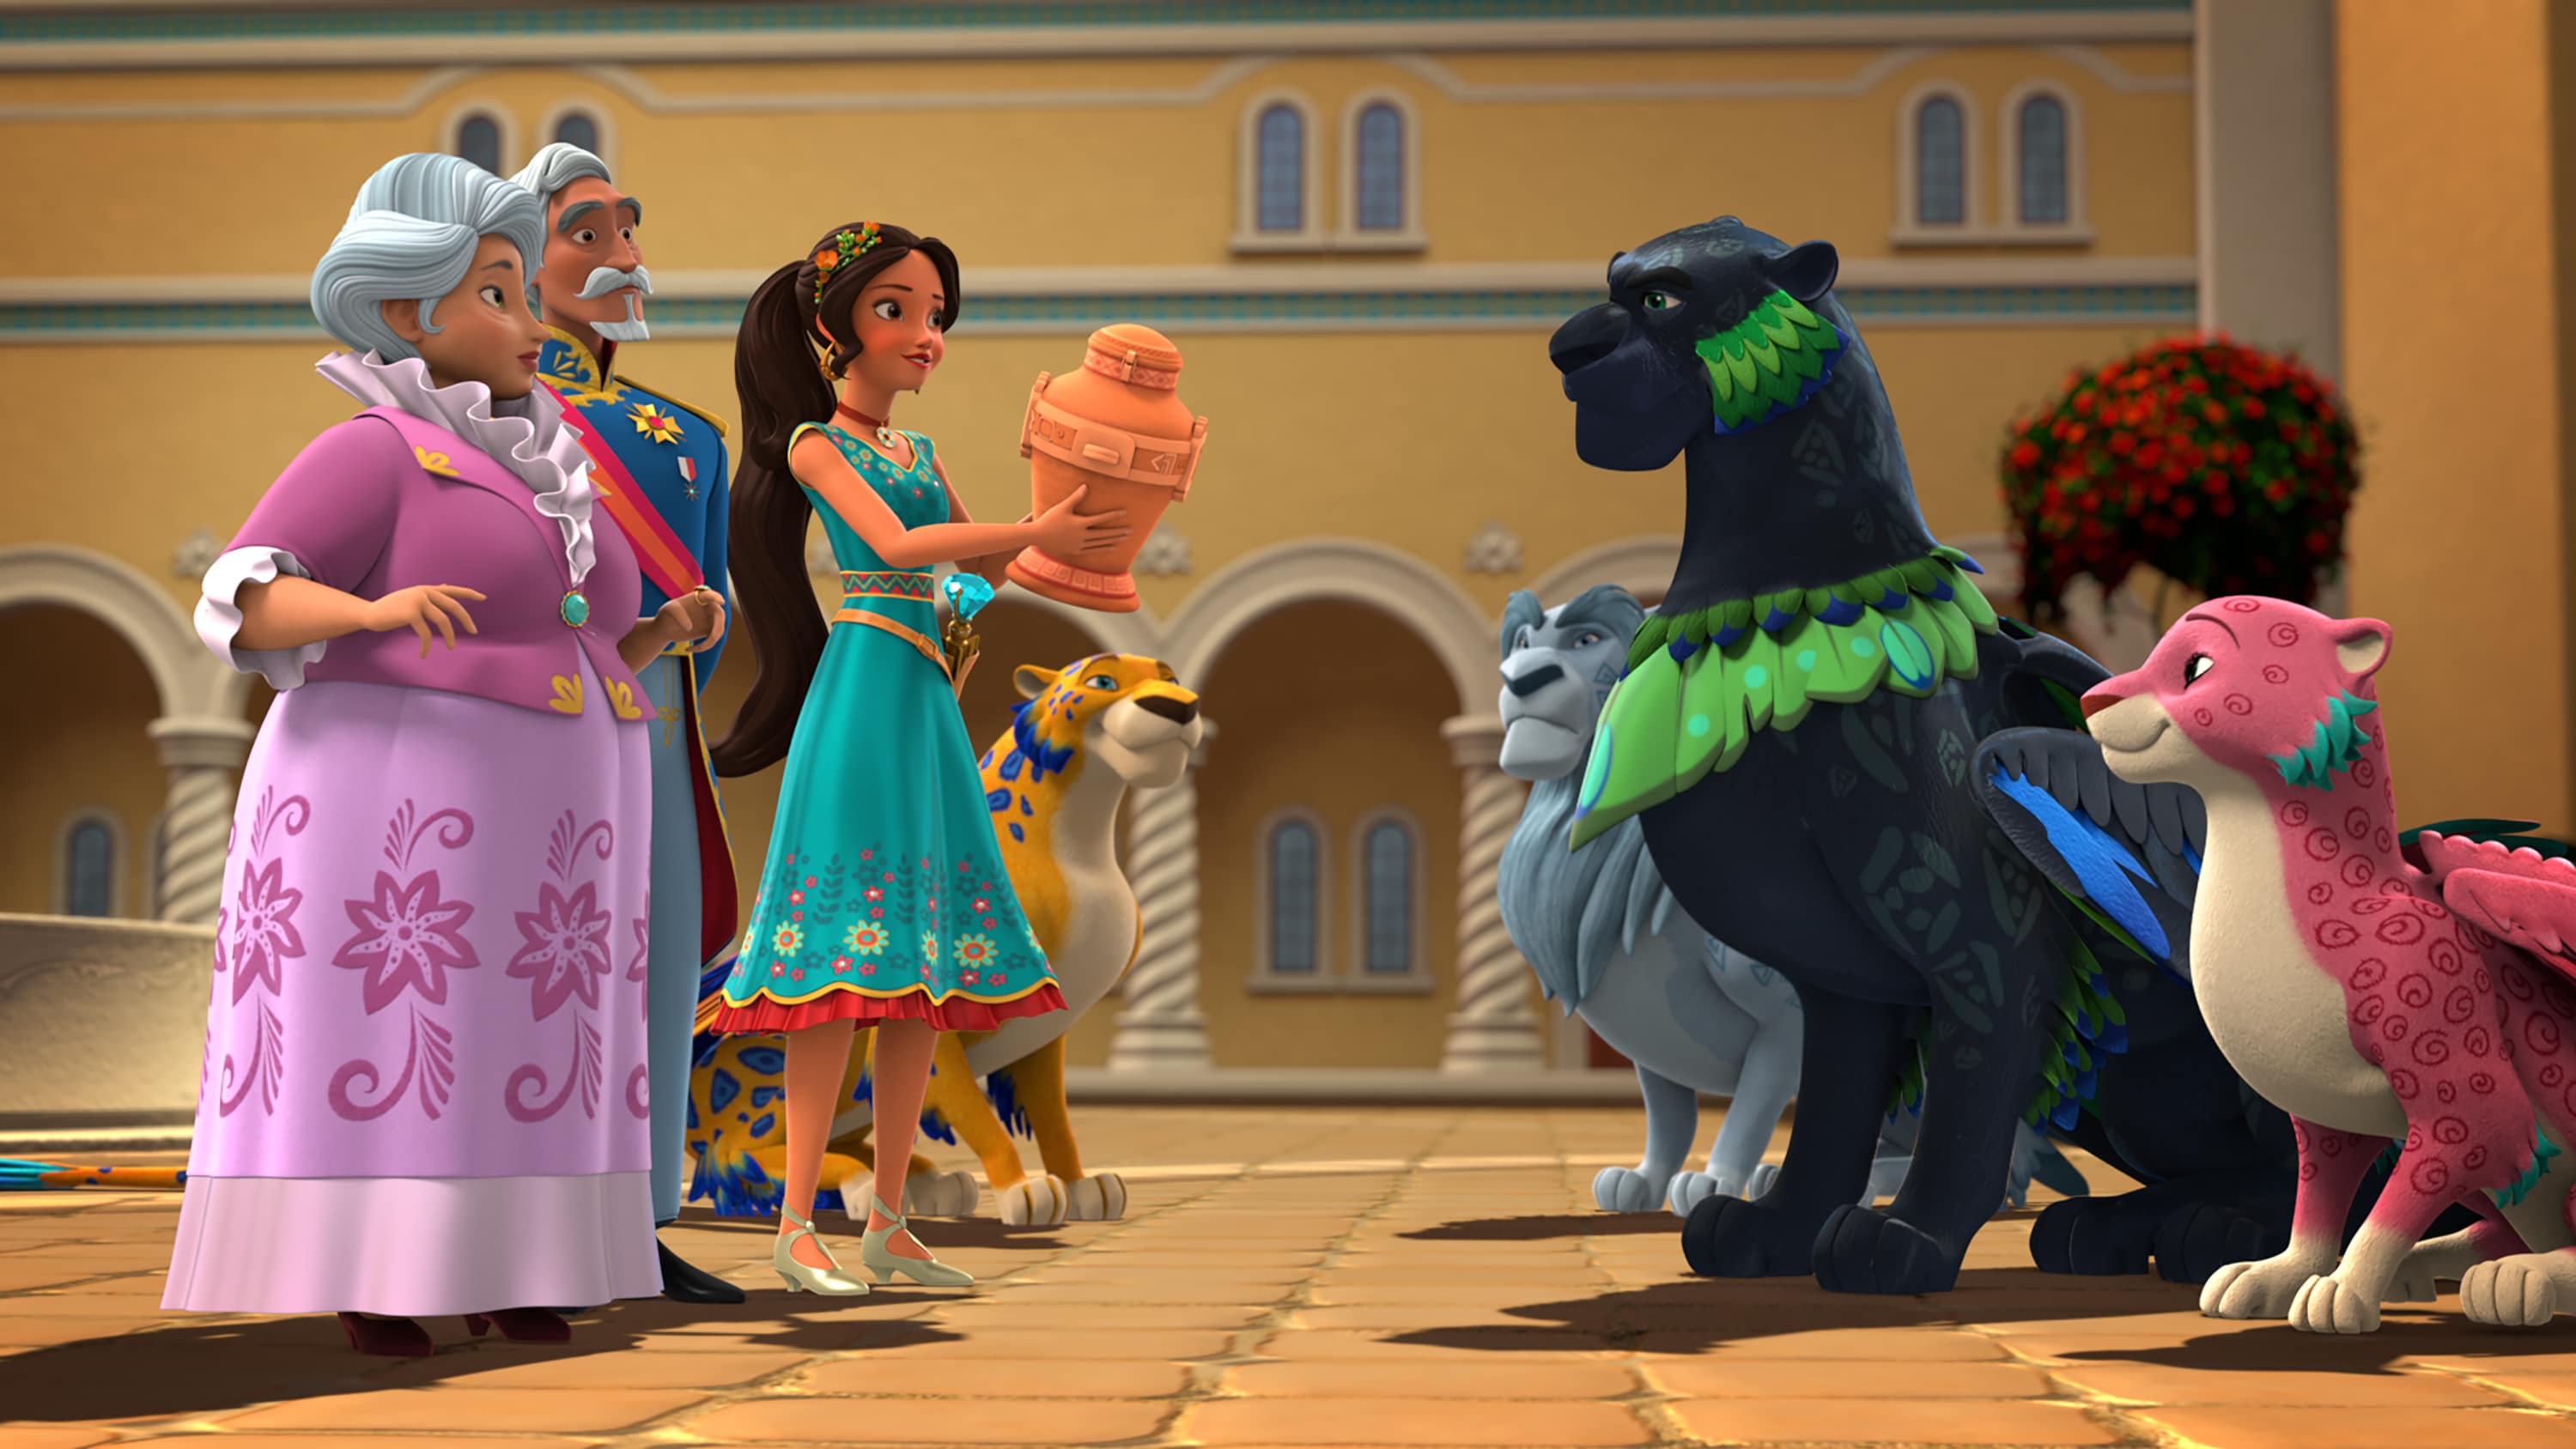 Are your kids big fans of Elena of Avalor like mine? 